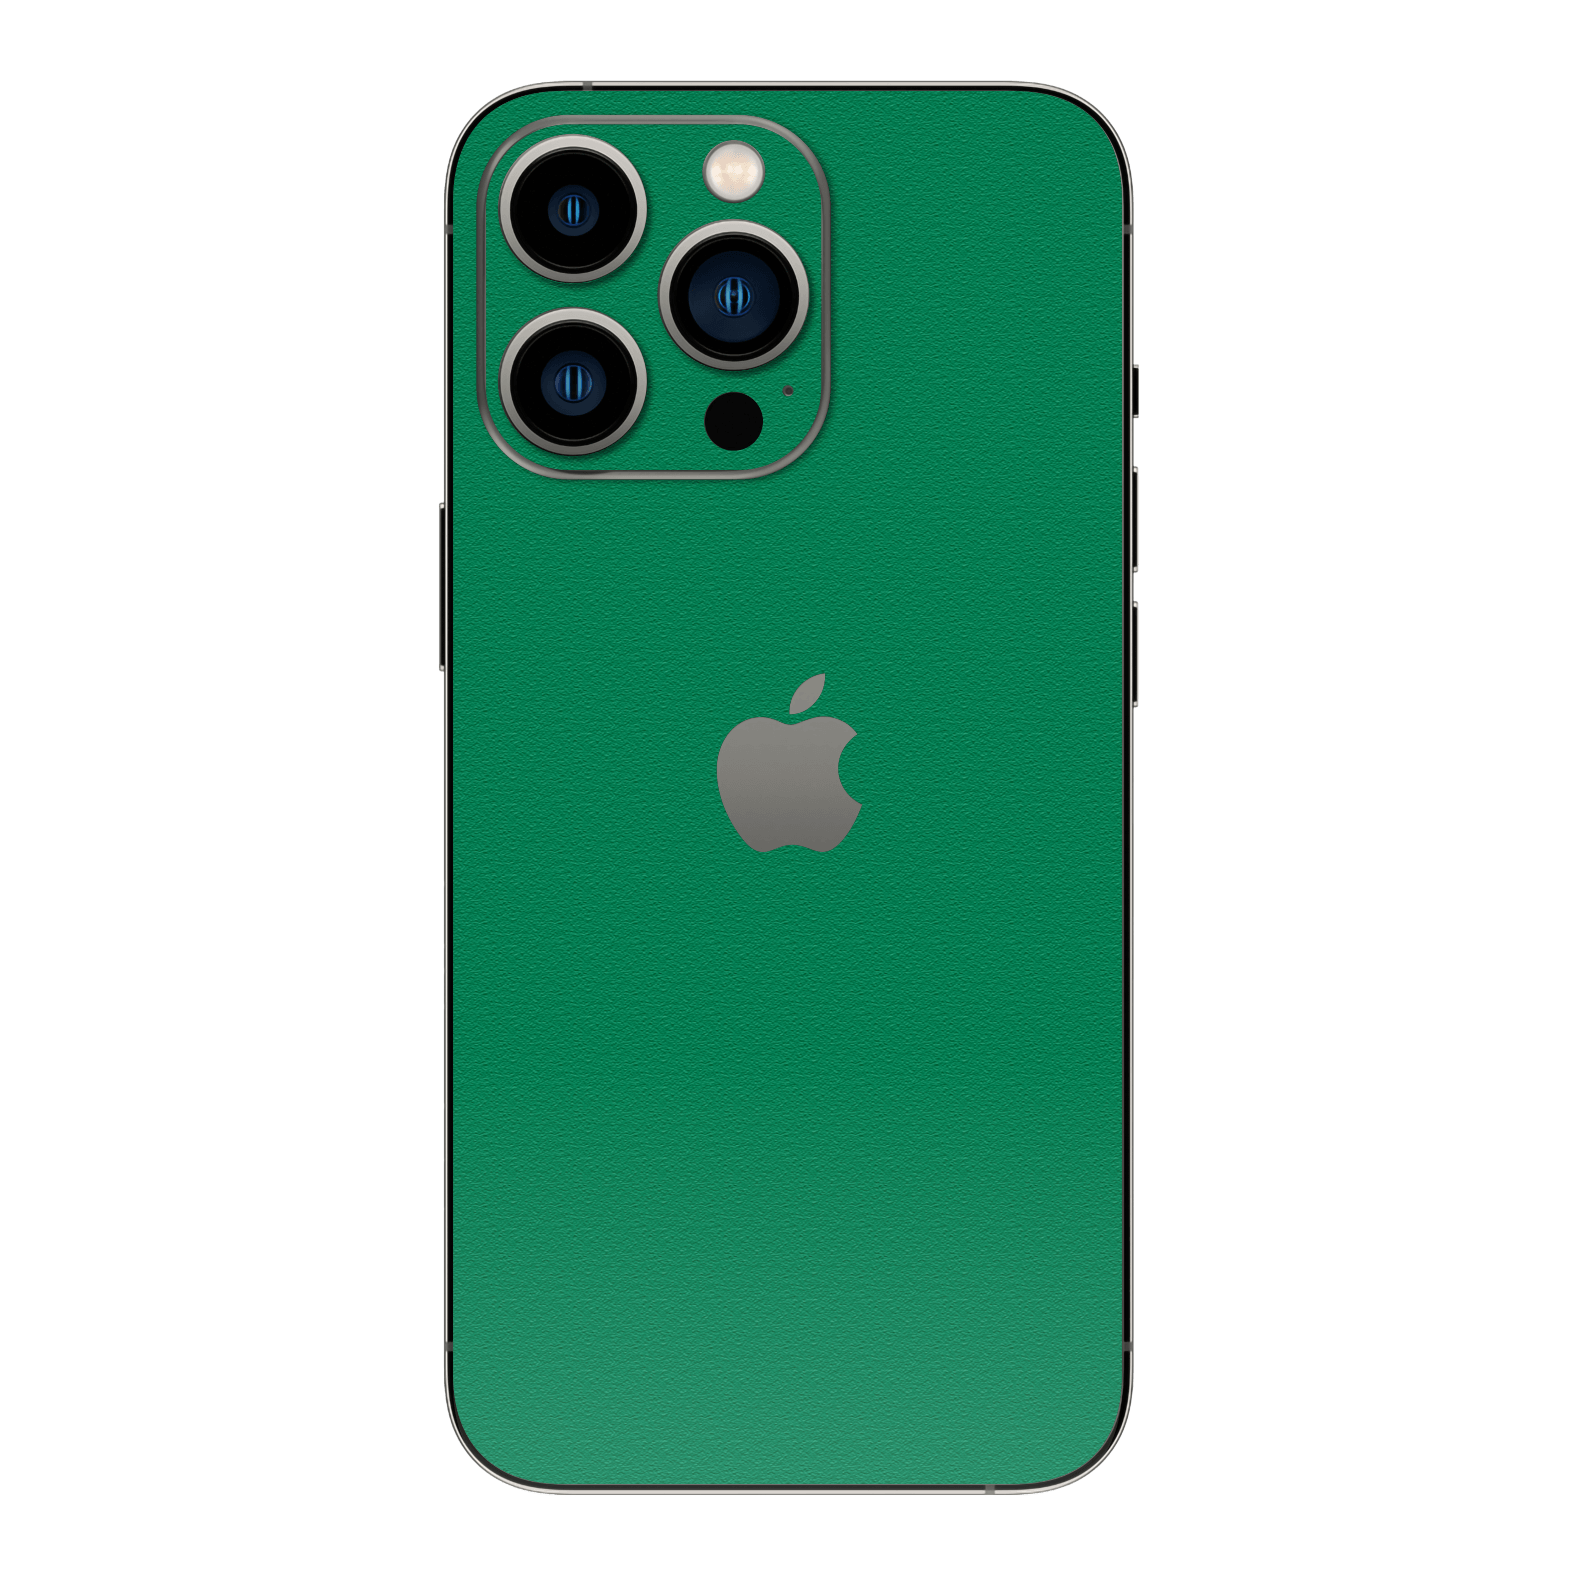 iPhone 14 PRO LUXURIA VERONESE Green Textured Skin - Premium Protective Skin Wrap Sticker Decal Cover by QSKINZ | Qskinz.com